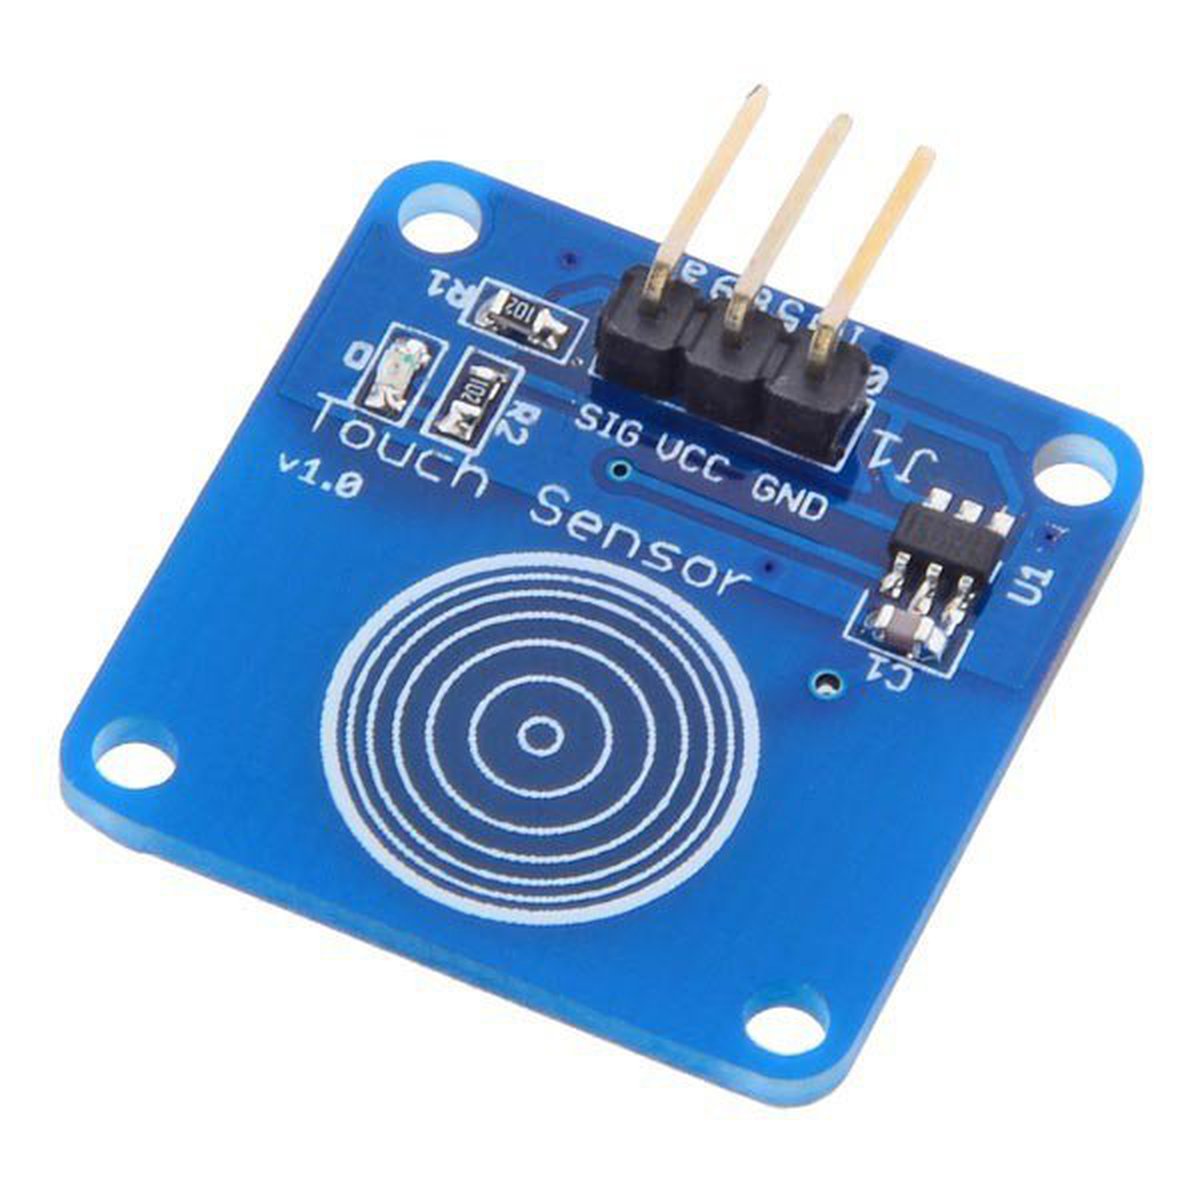 Jog Type Sensor Module Capacitive Switch Module For Arduino from MMM999 on